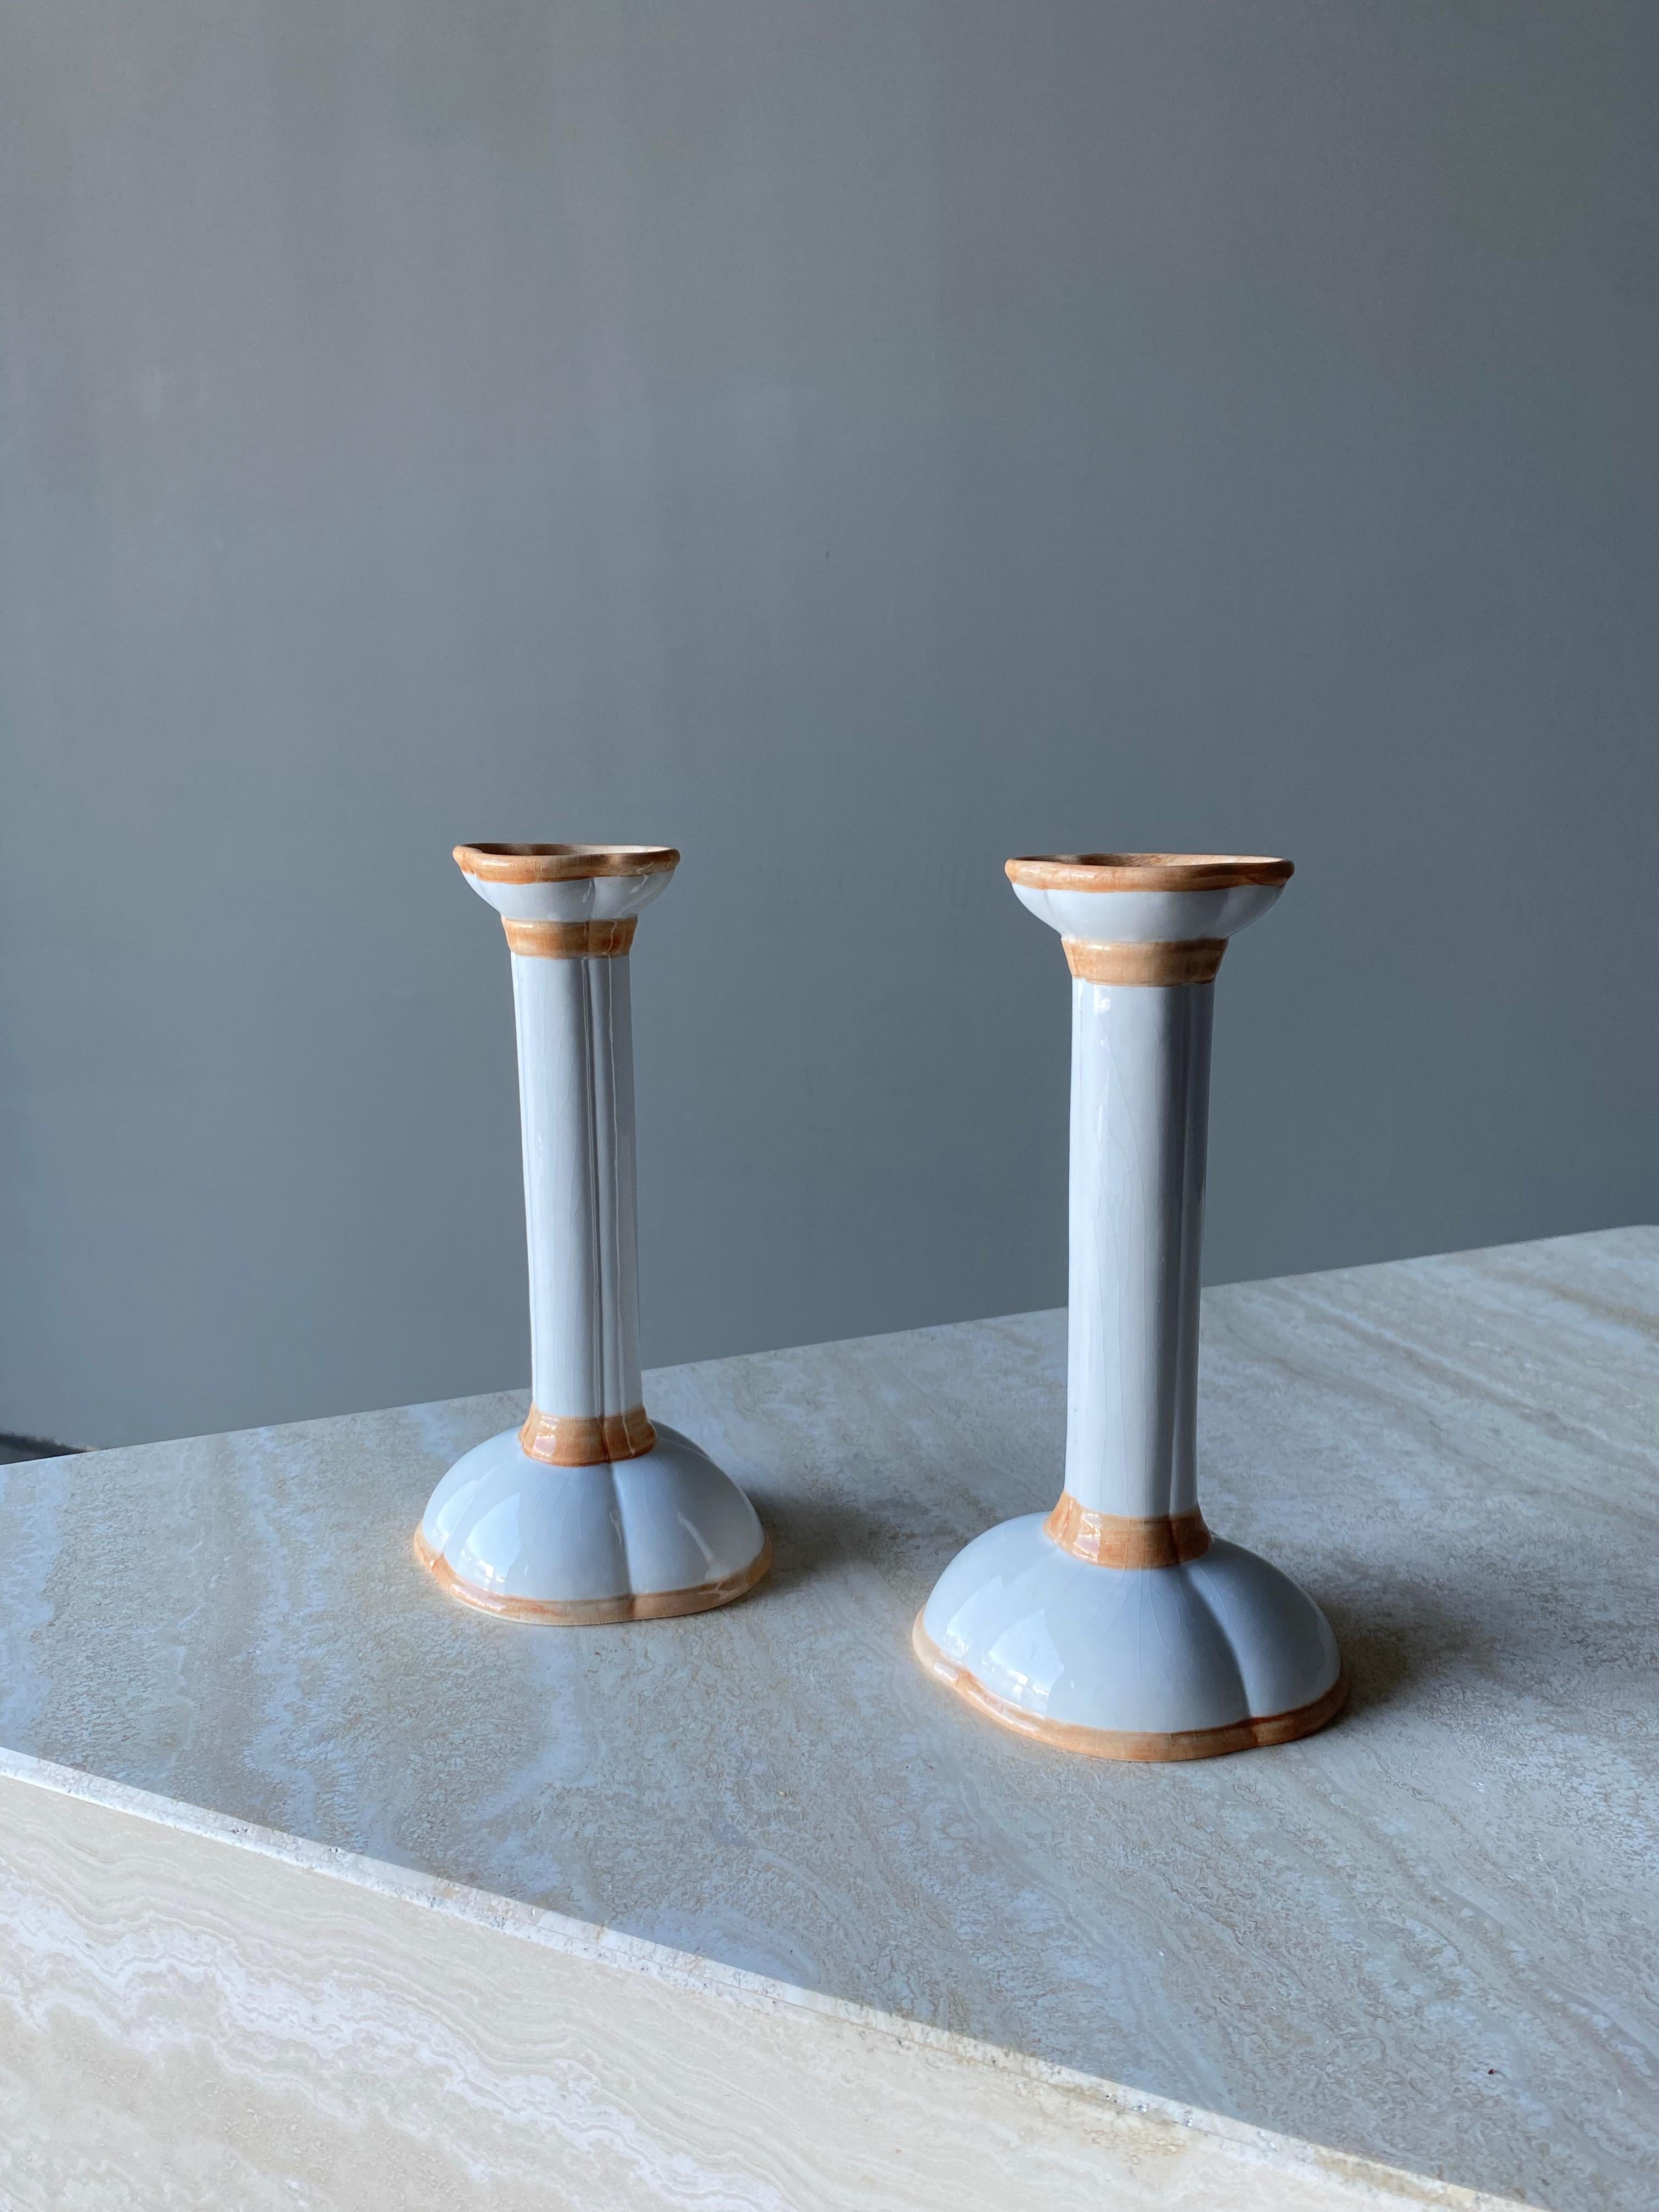 Italian Hand Painted Ceramic Candlesticks, 1960s For Sale 4